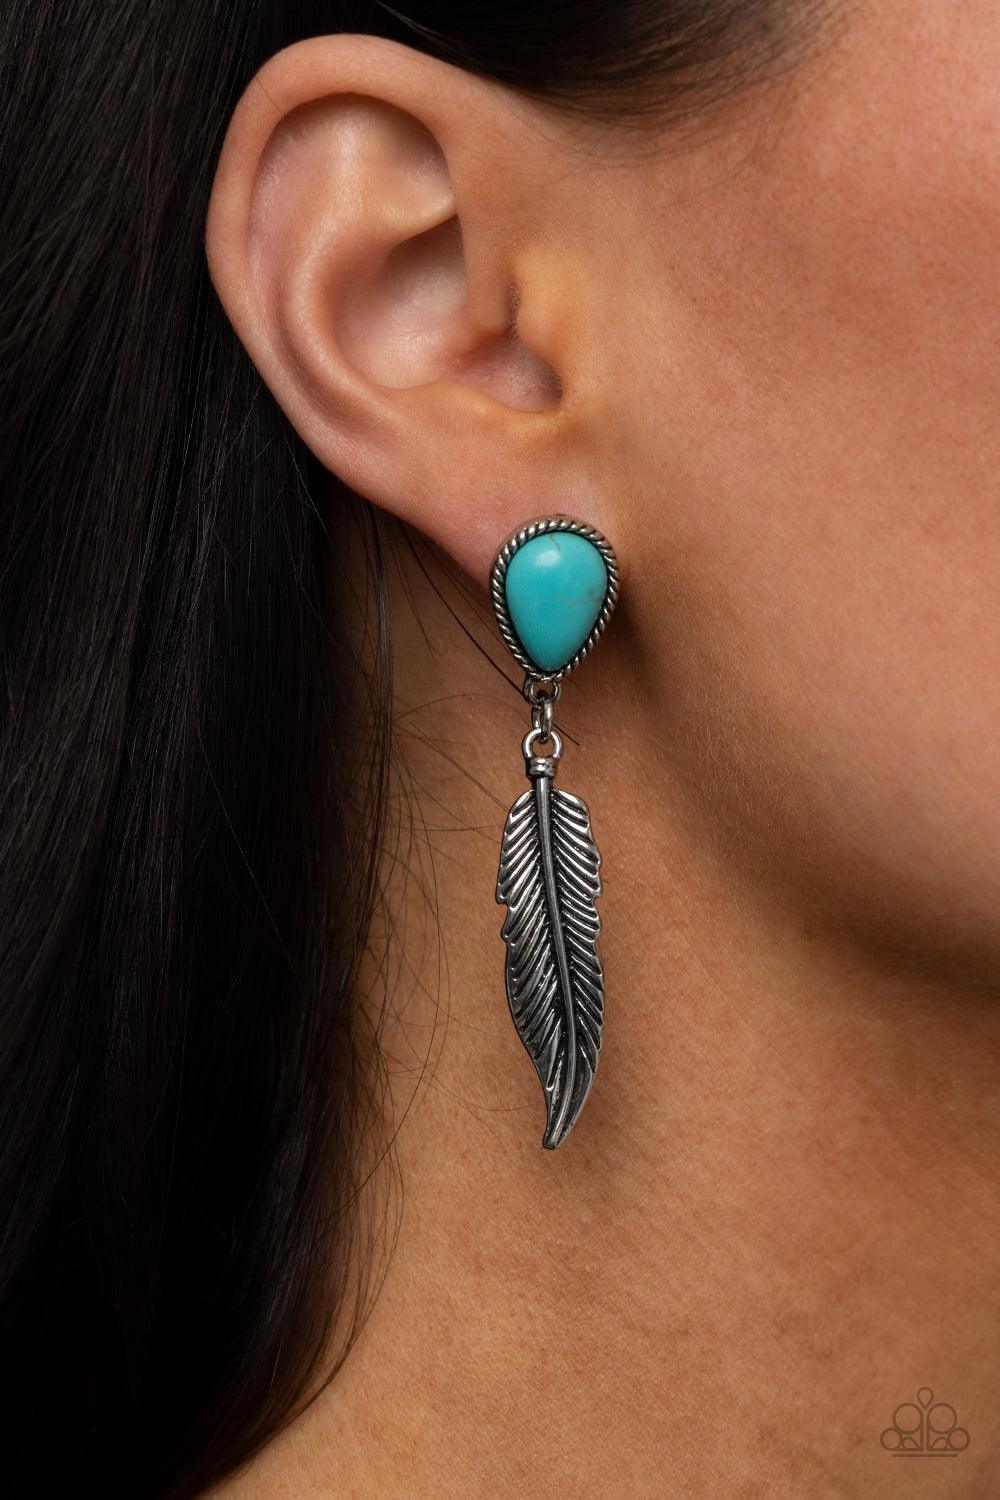 Paparazzi Accessories Totally Tran-QUILL - Blue A lifelike silver feather charm swings from the bottom of a teardrop turquoise stone teardrop, coalescing into a tranquil lure. Earring attaches to a standard post fitting. Sold as one pair of post earrings.